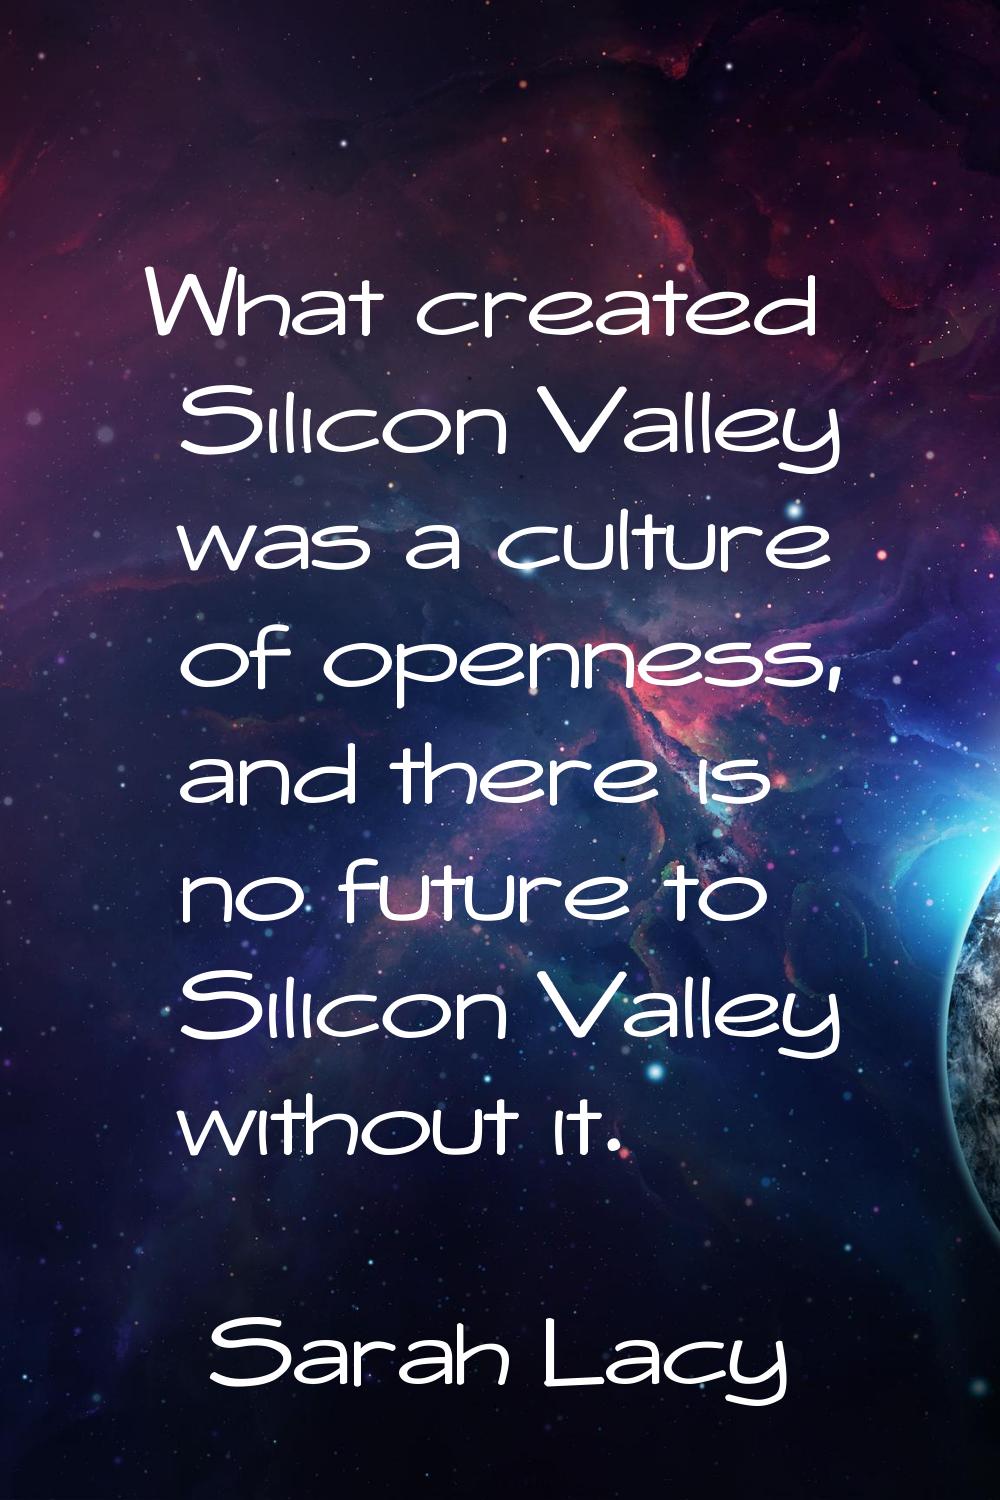 What created Silicon Valley was a culture of openness, and there is no future to Silicon Valley wit